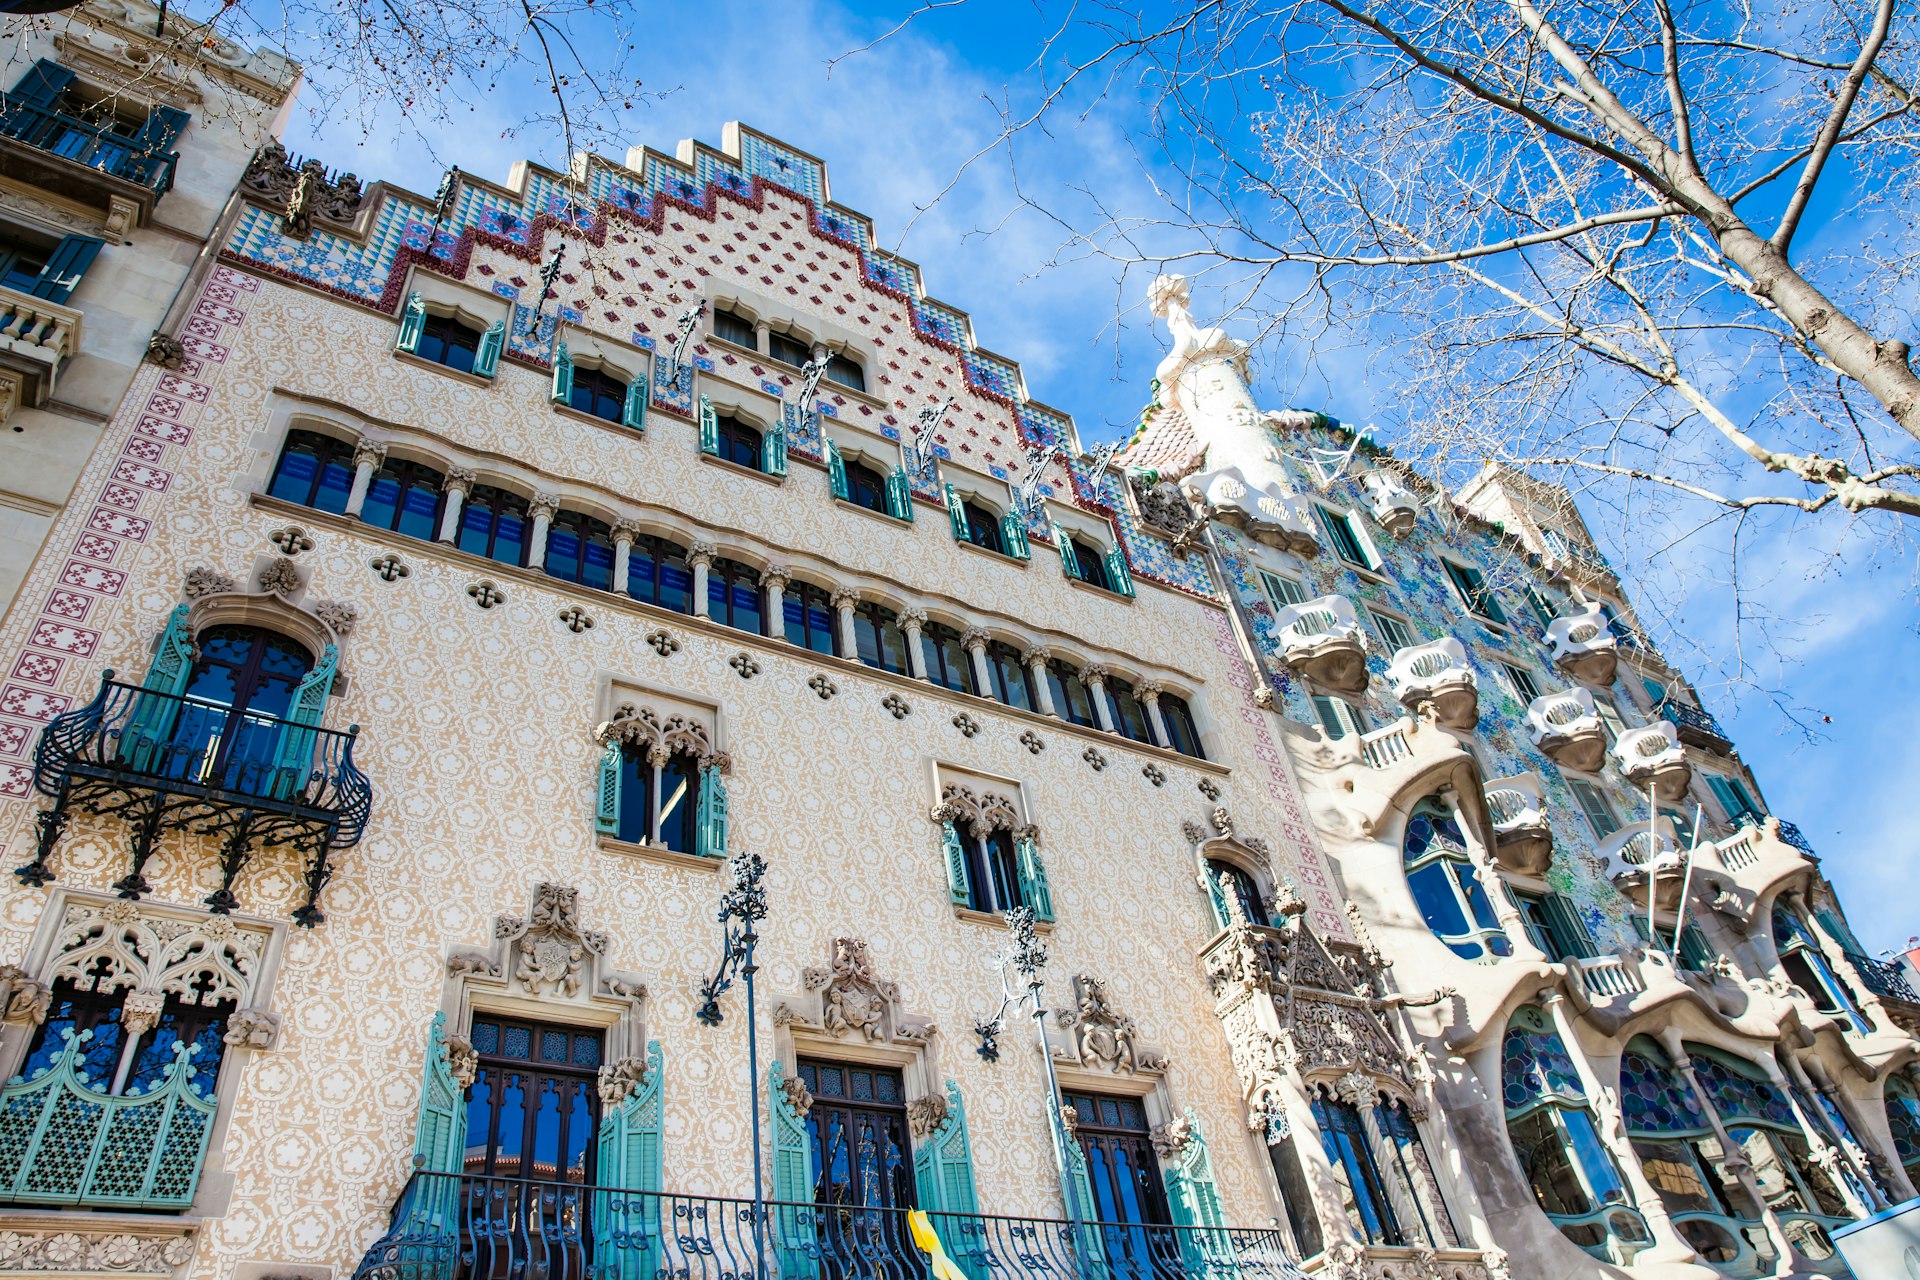 Exterior view of Casa Amatller in Barcelona, Spain